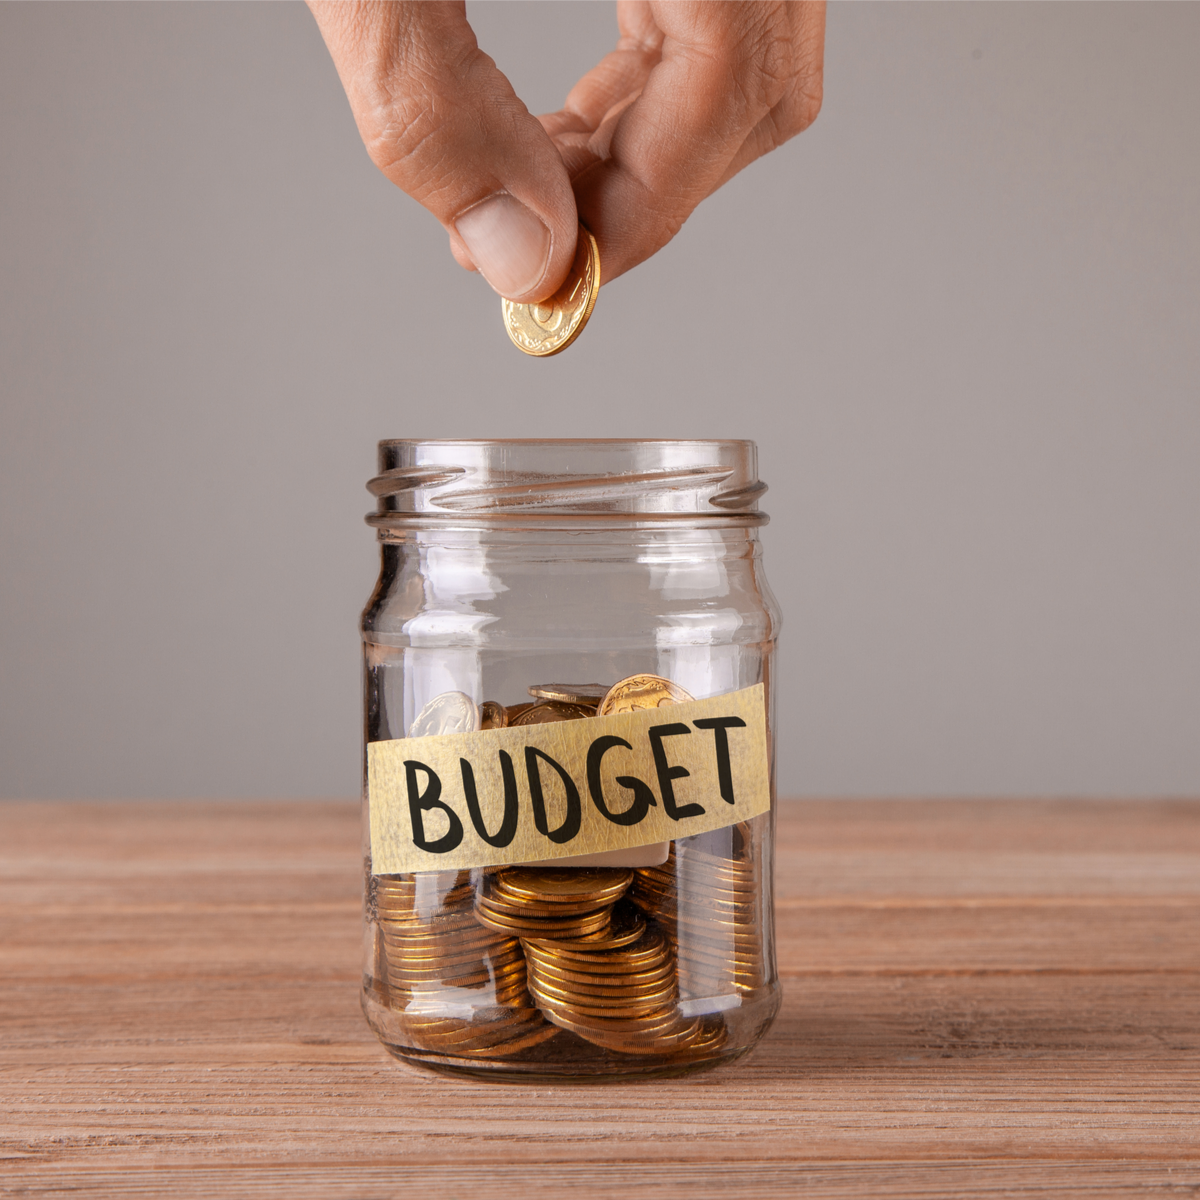 How to Plan a Budget for Your Facility Equipment